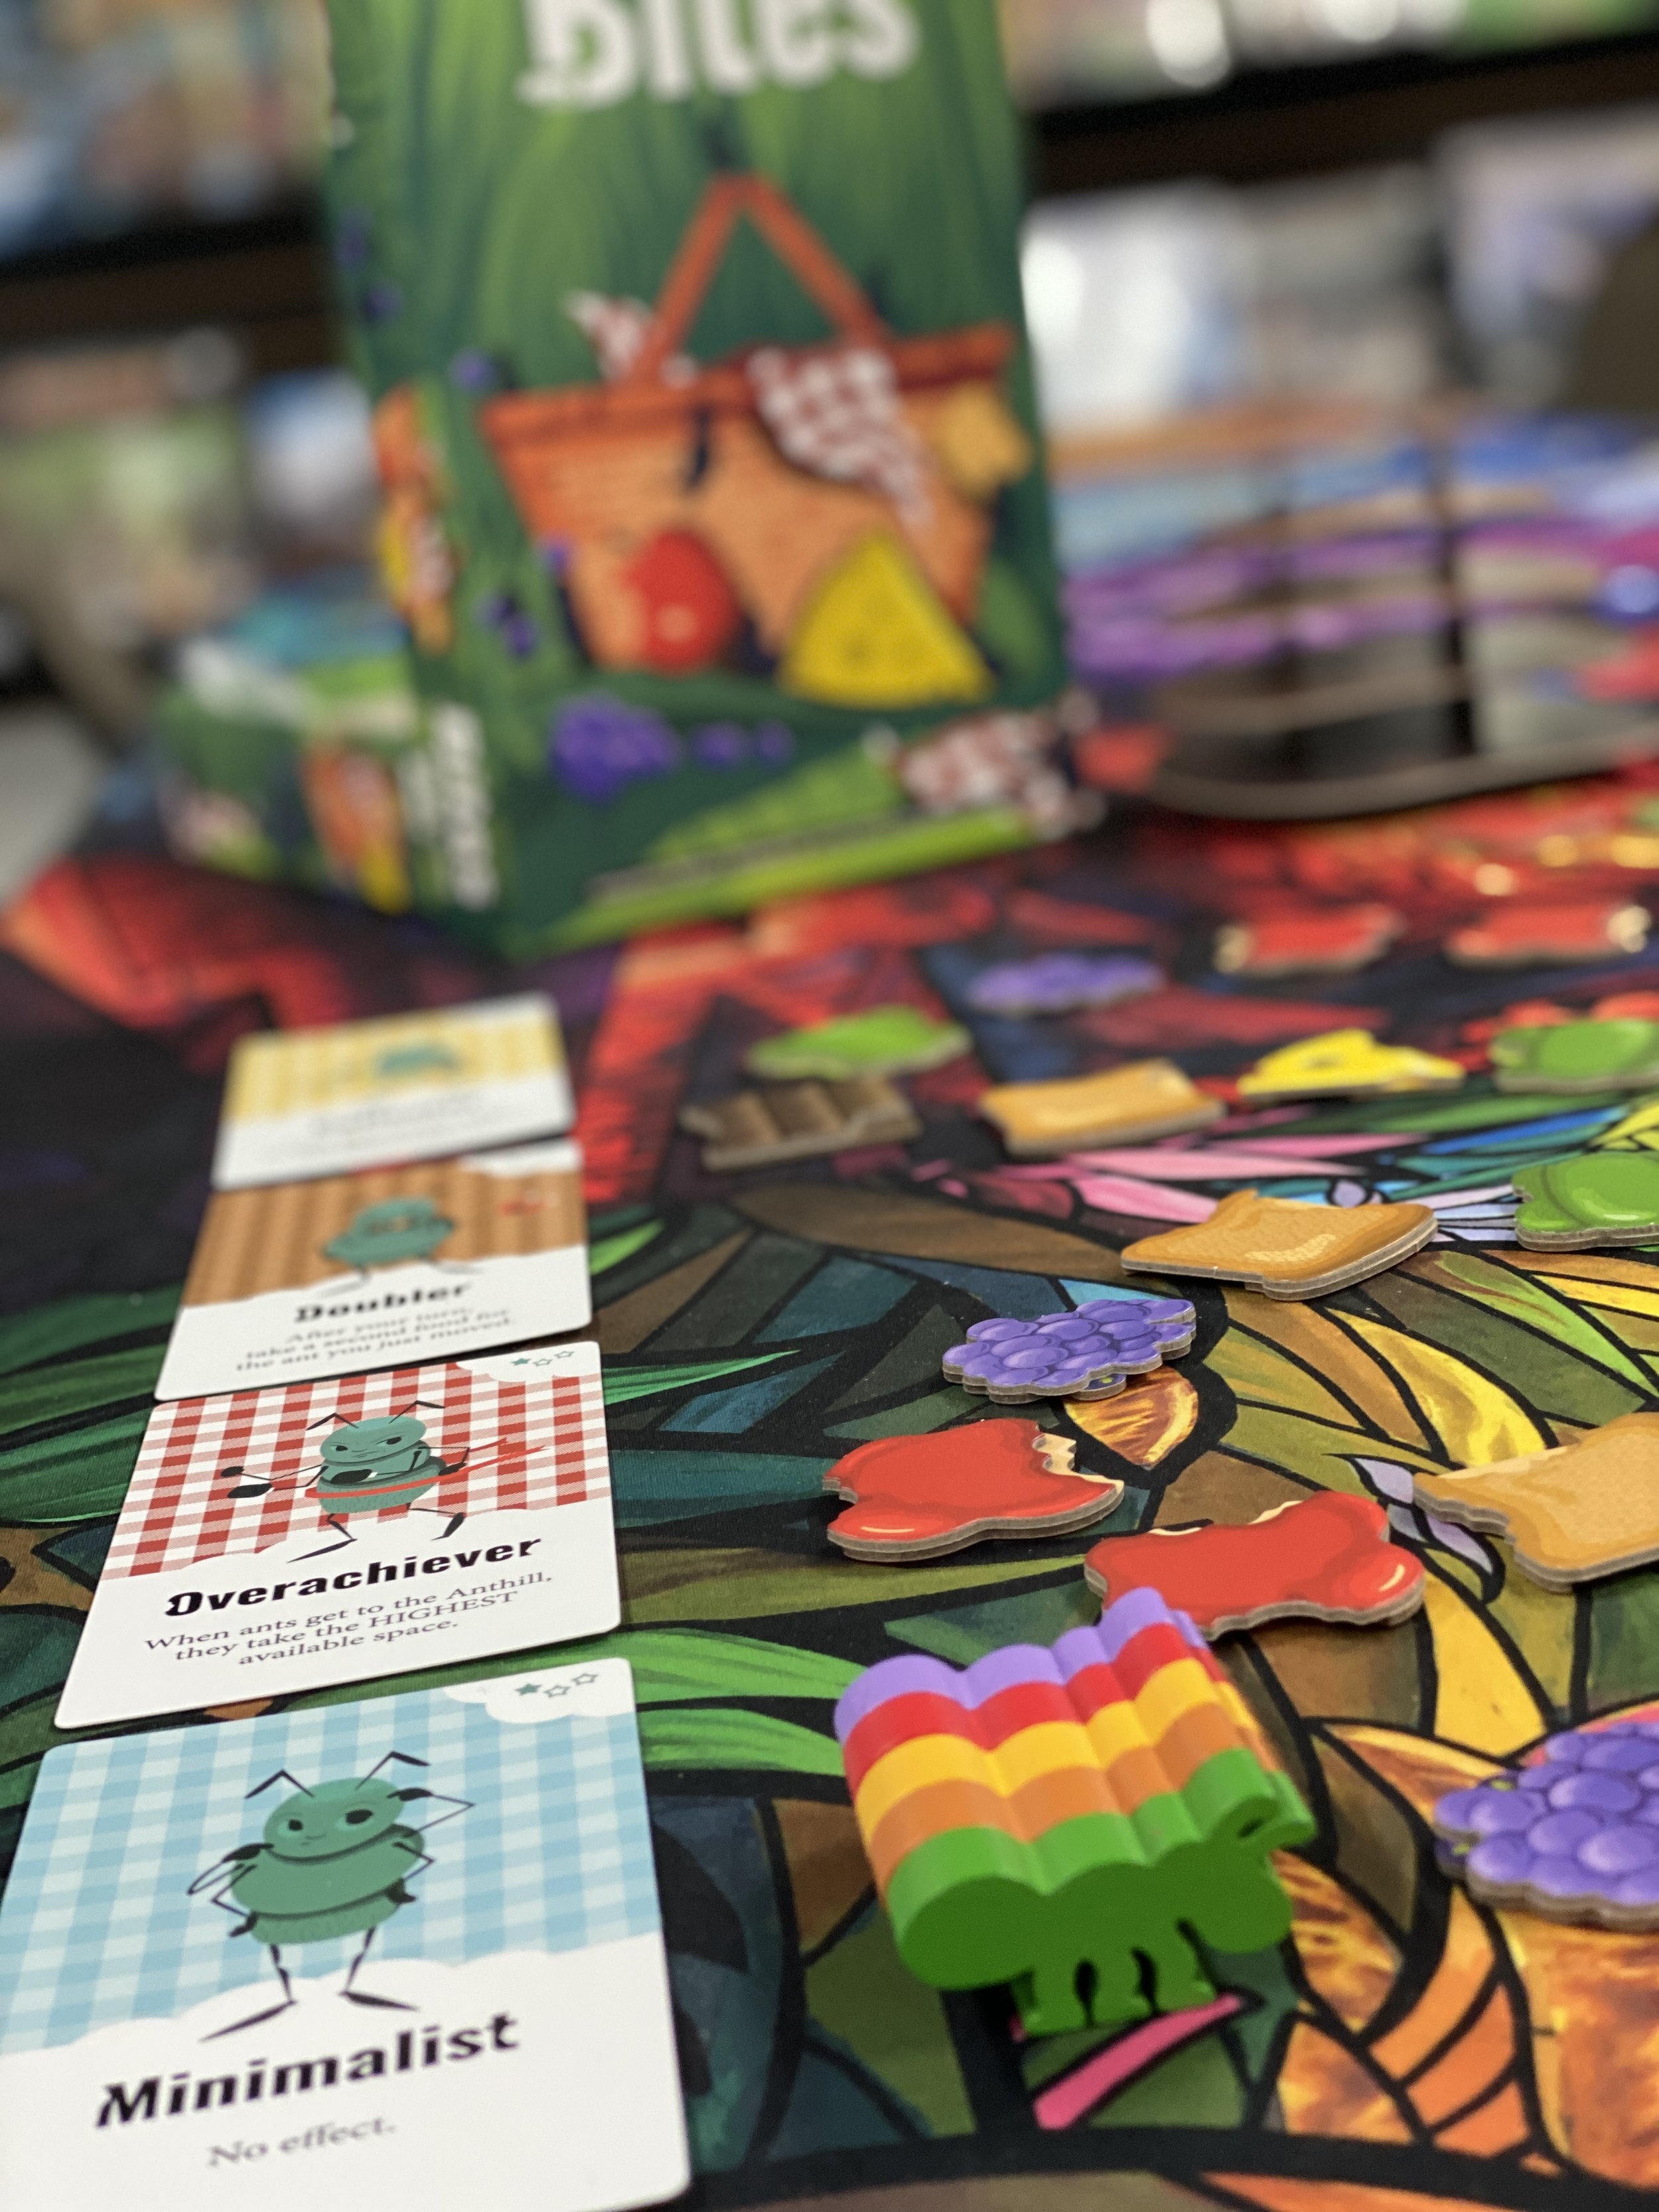 Forbidden Island — Cabbages and Kings Games